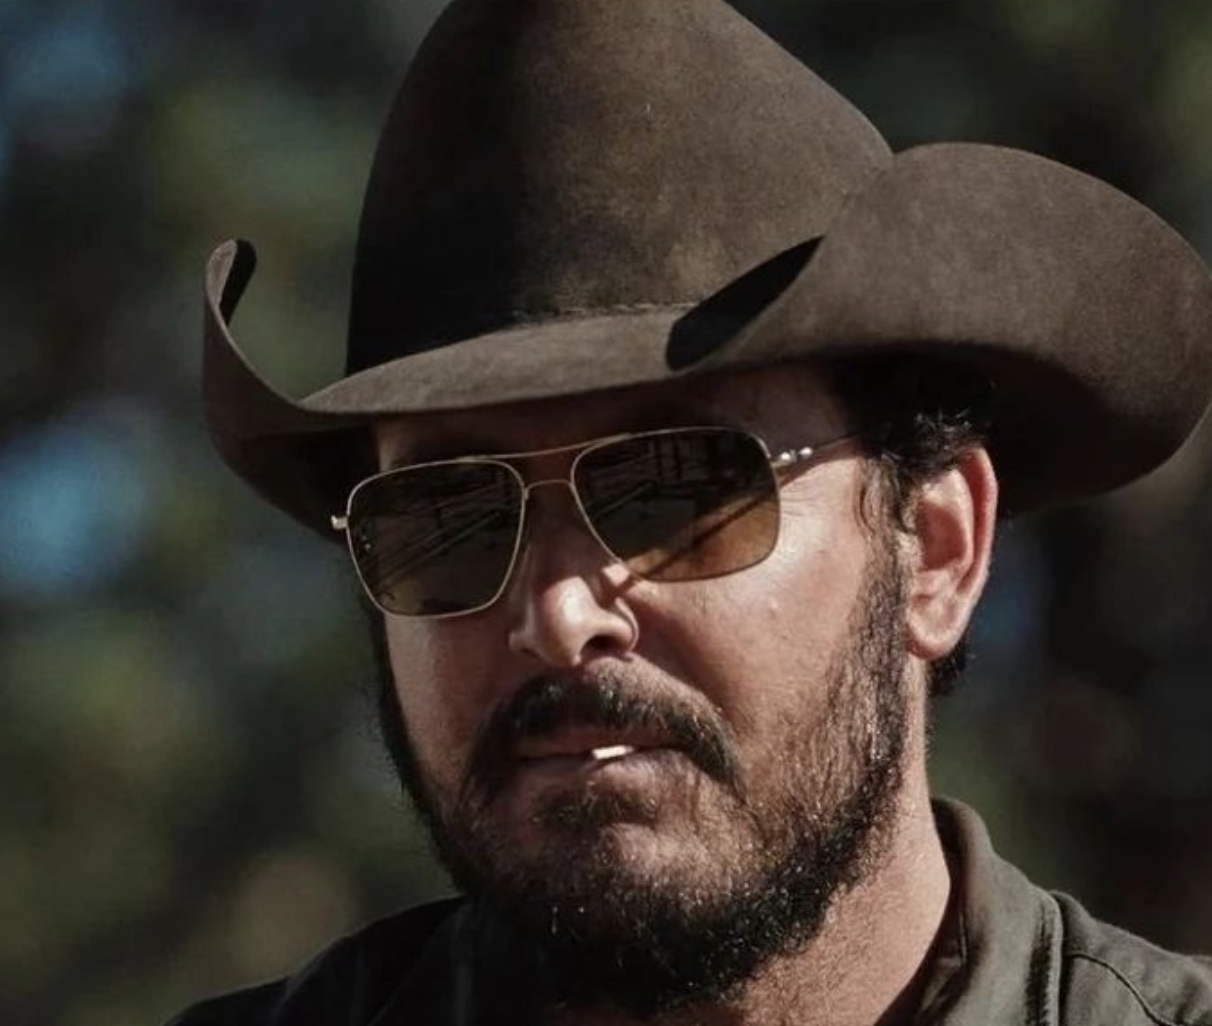 What Sunglasses Does Rip Wheeler From Yellowstone Wear?